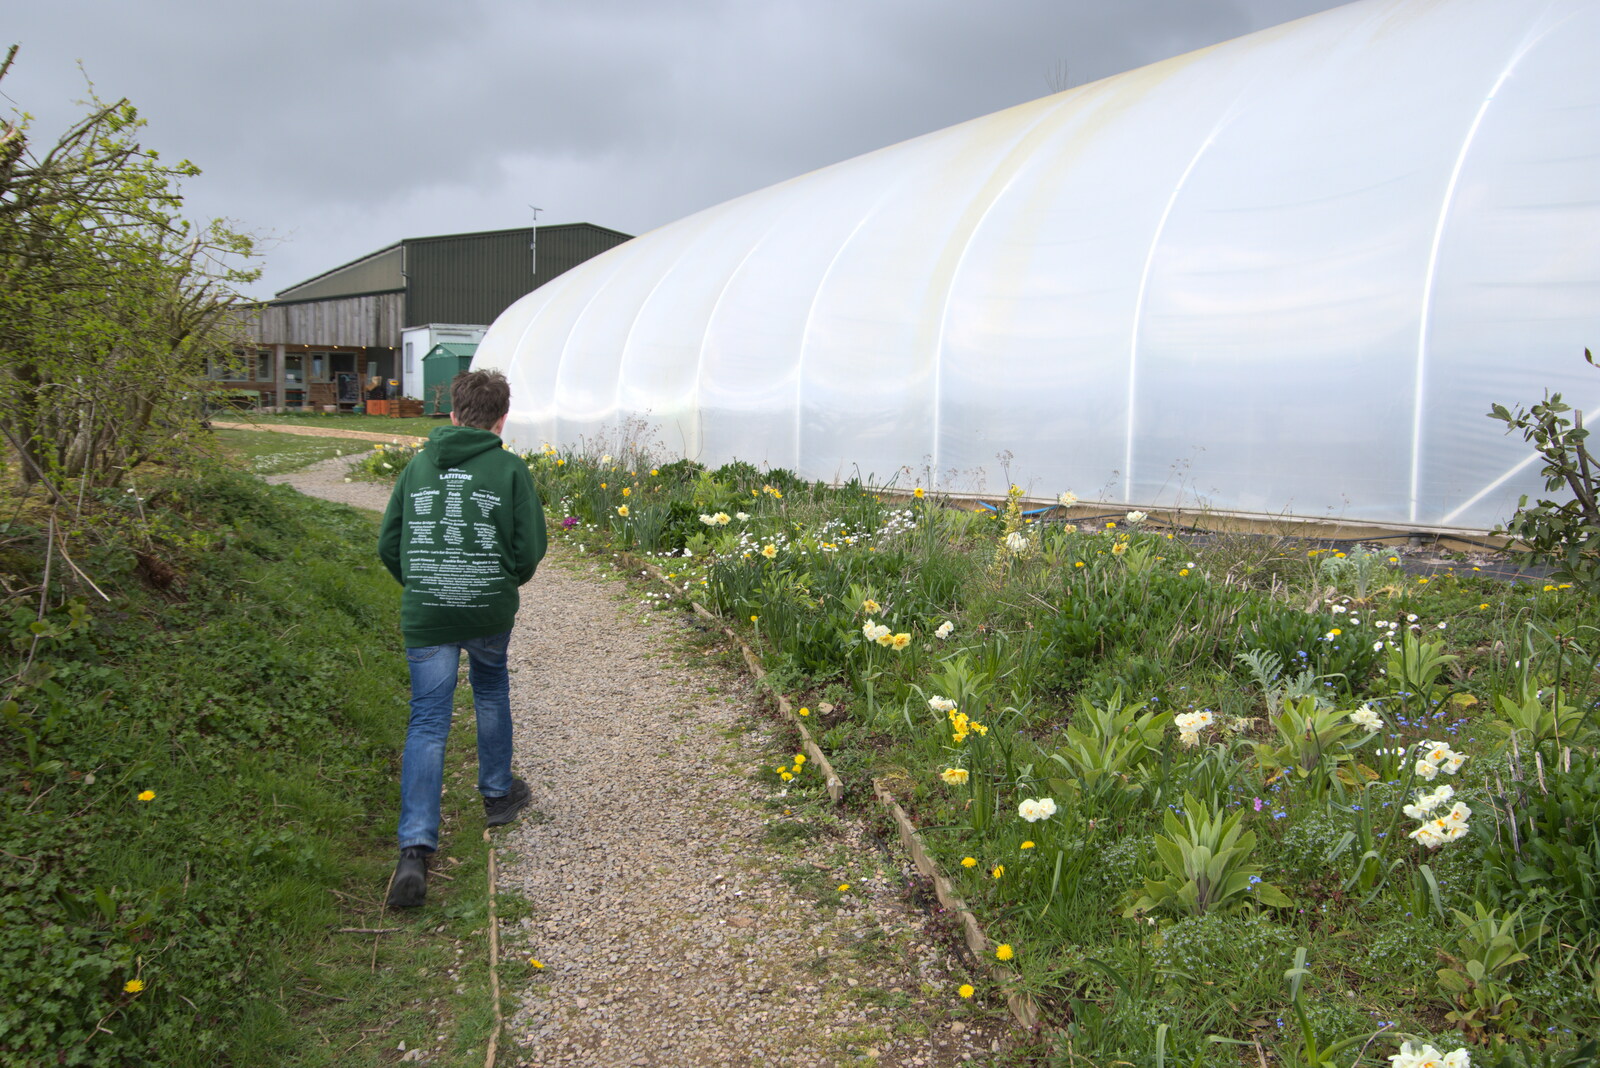 Fred roams around by a polytunnel from Chilli Farms, Okehampton and the Oxenham Arms, South Zeal, Devon - 10th April 2023